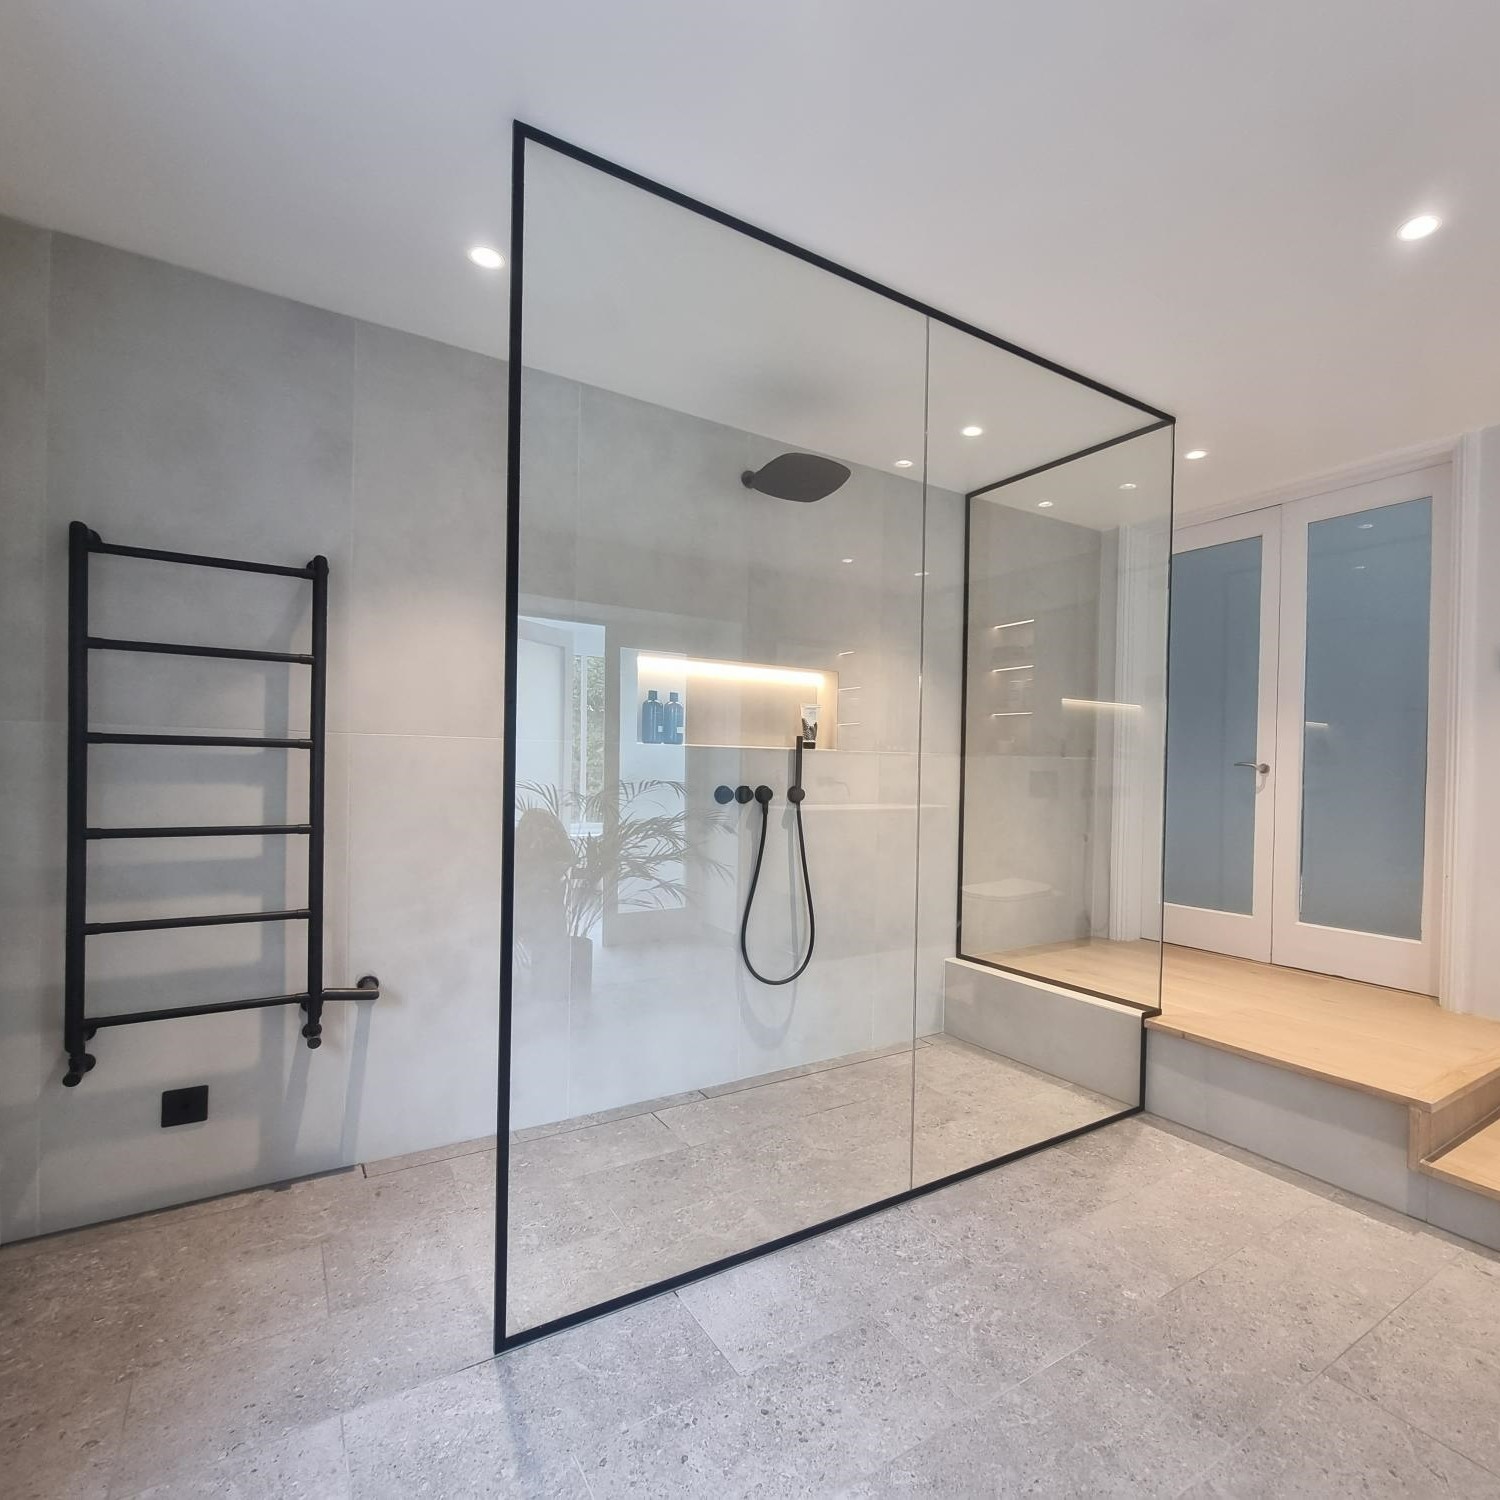 Residential Projects | Bathroom Design Inspiration | C.P. Hart